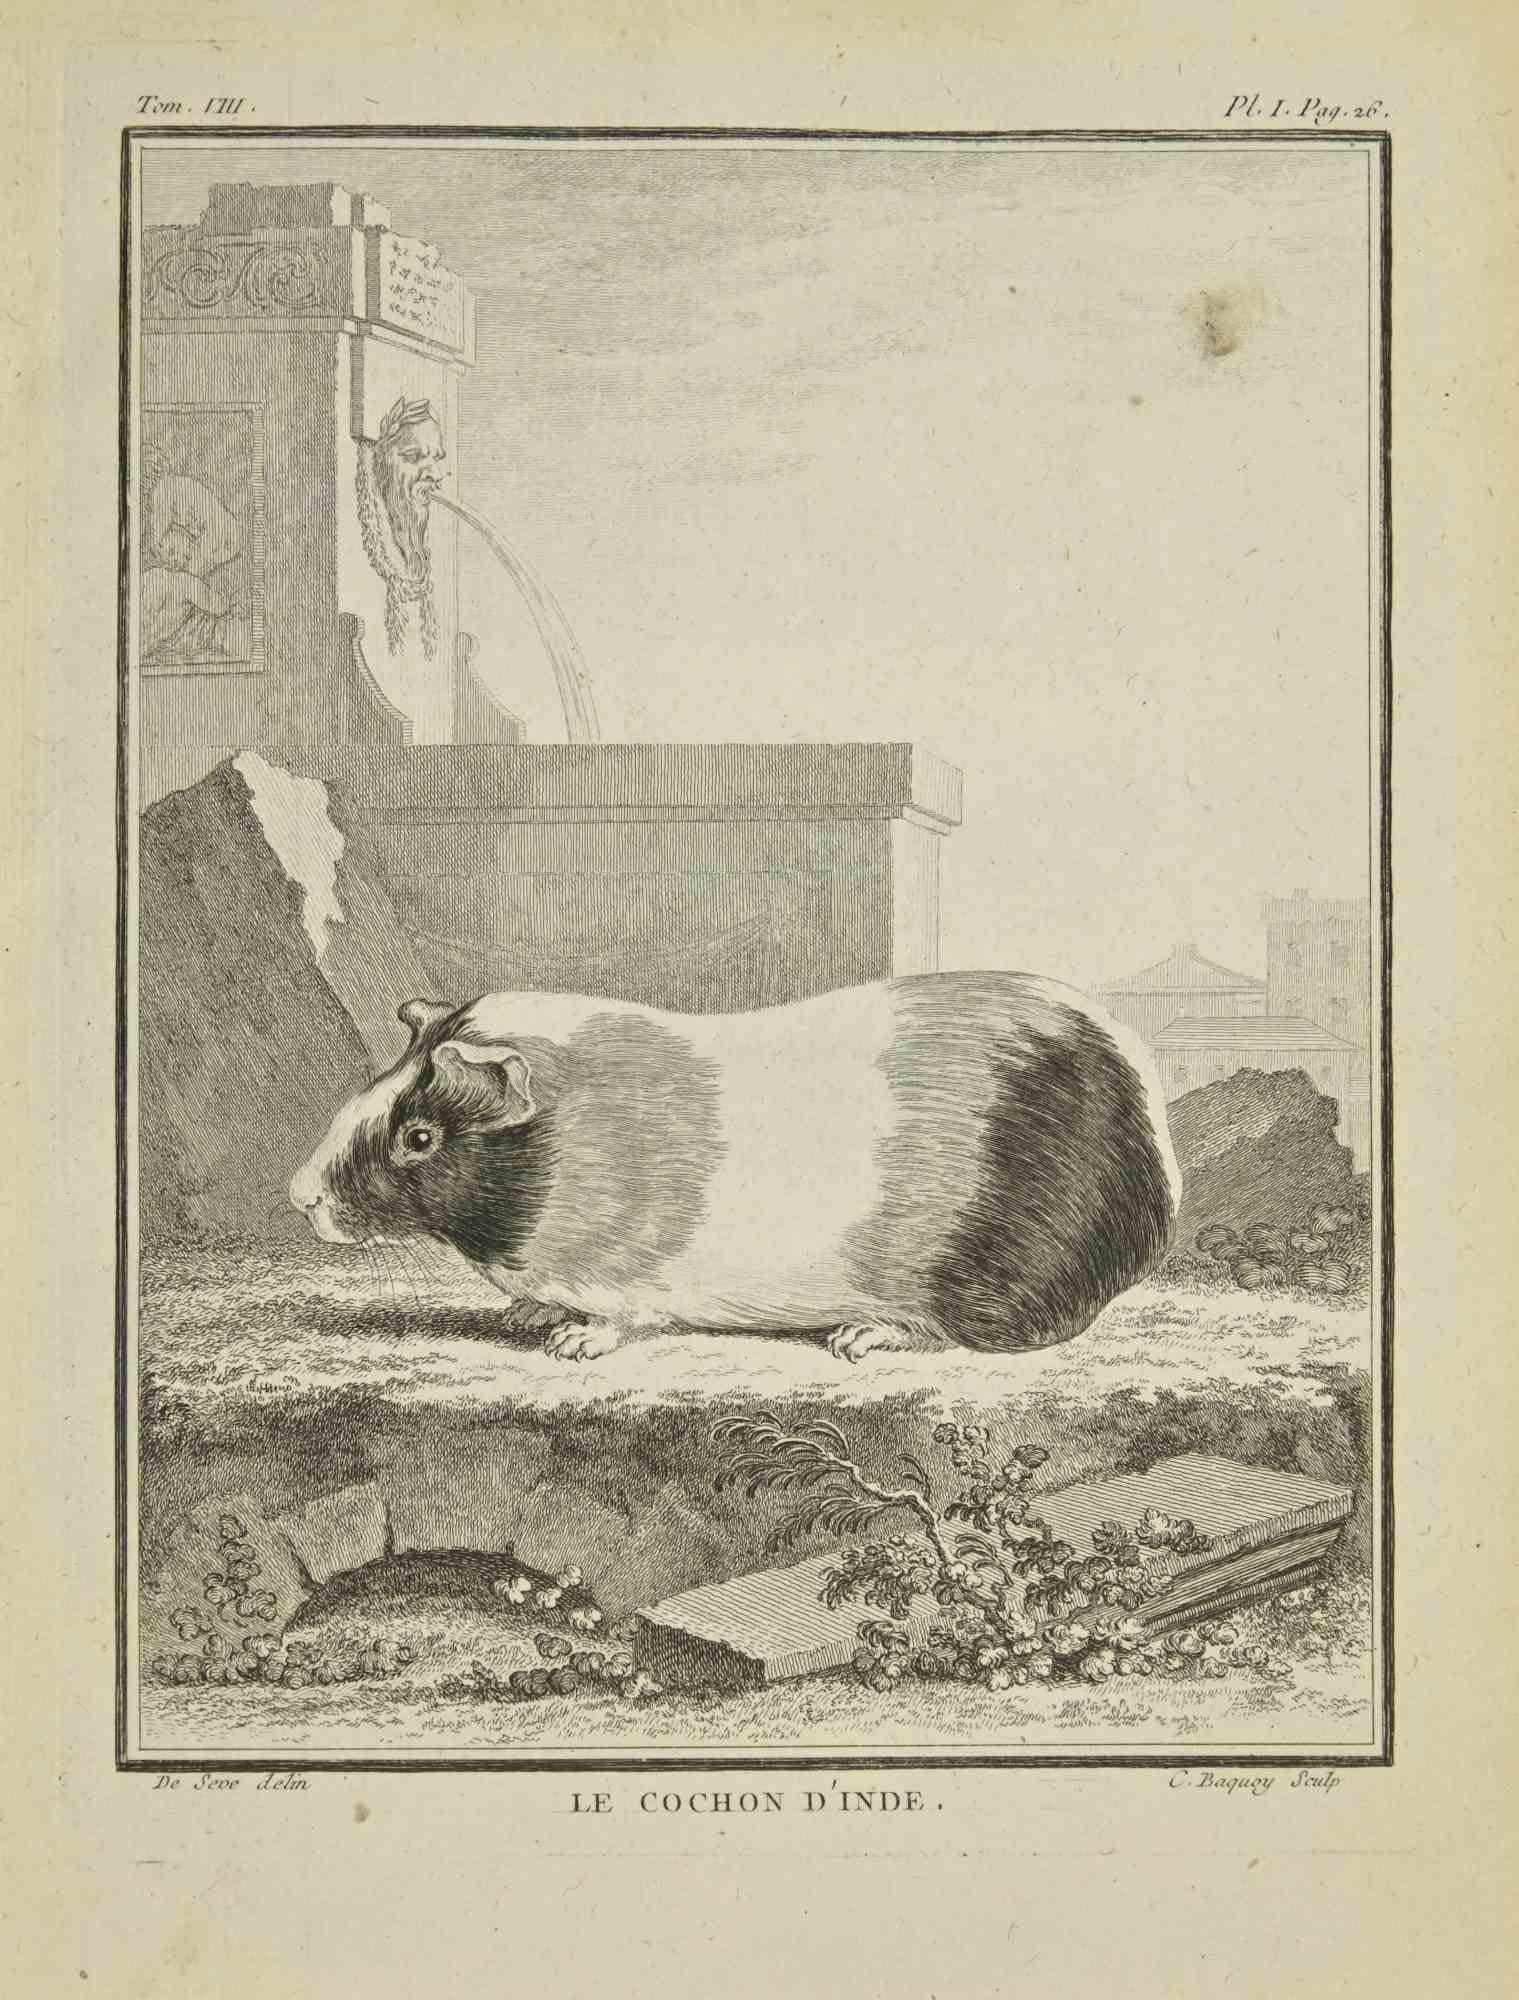 Le Petit Cochon d'Inde  - Etching by Pierre Charles Baquoy - 1771